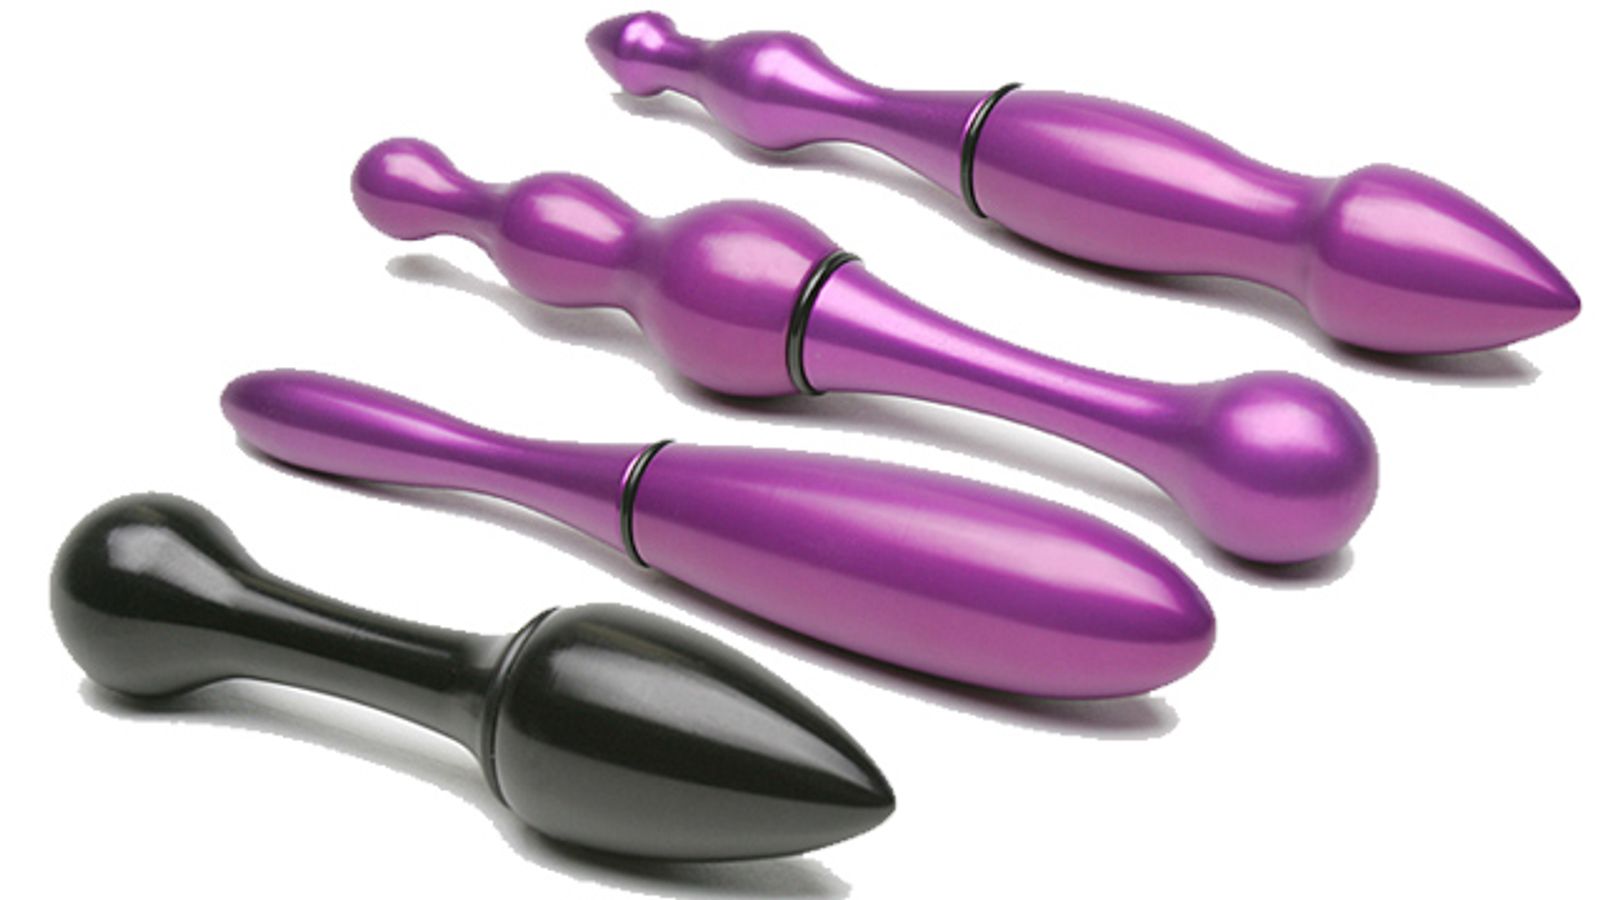 New Aluminum Line from Tantus Continues Green Philosophy